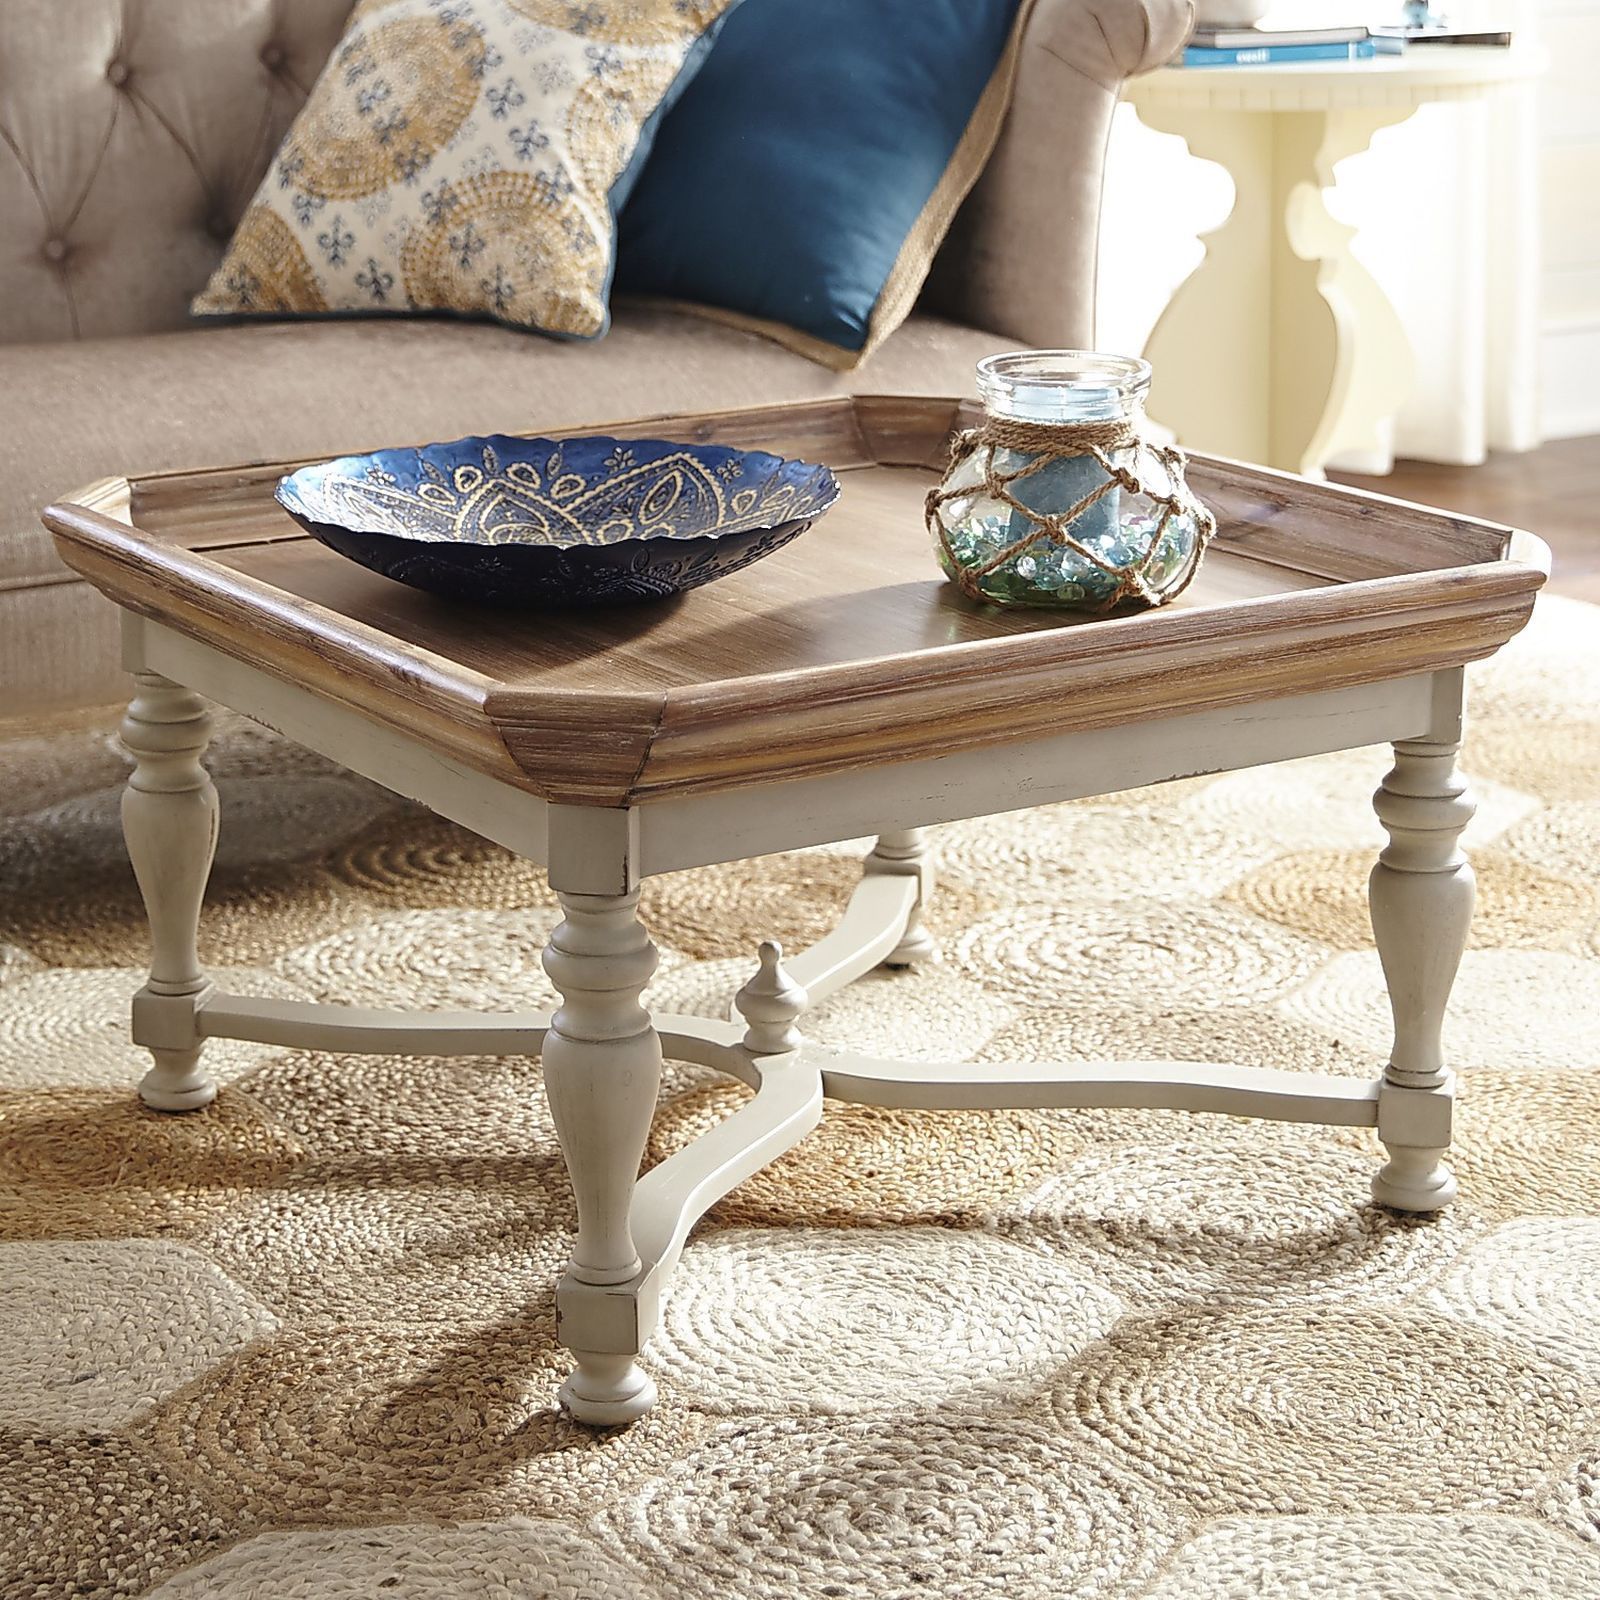 Amelia Natural Stonewash Square Coffee Table | Coffee Table Square Throughout Transitional Square Coffee Tables (Gallery 19 of 20)